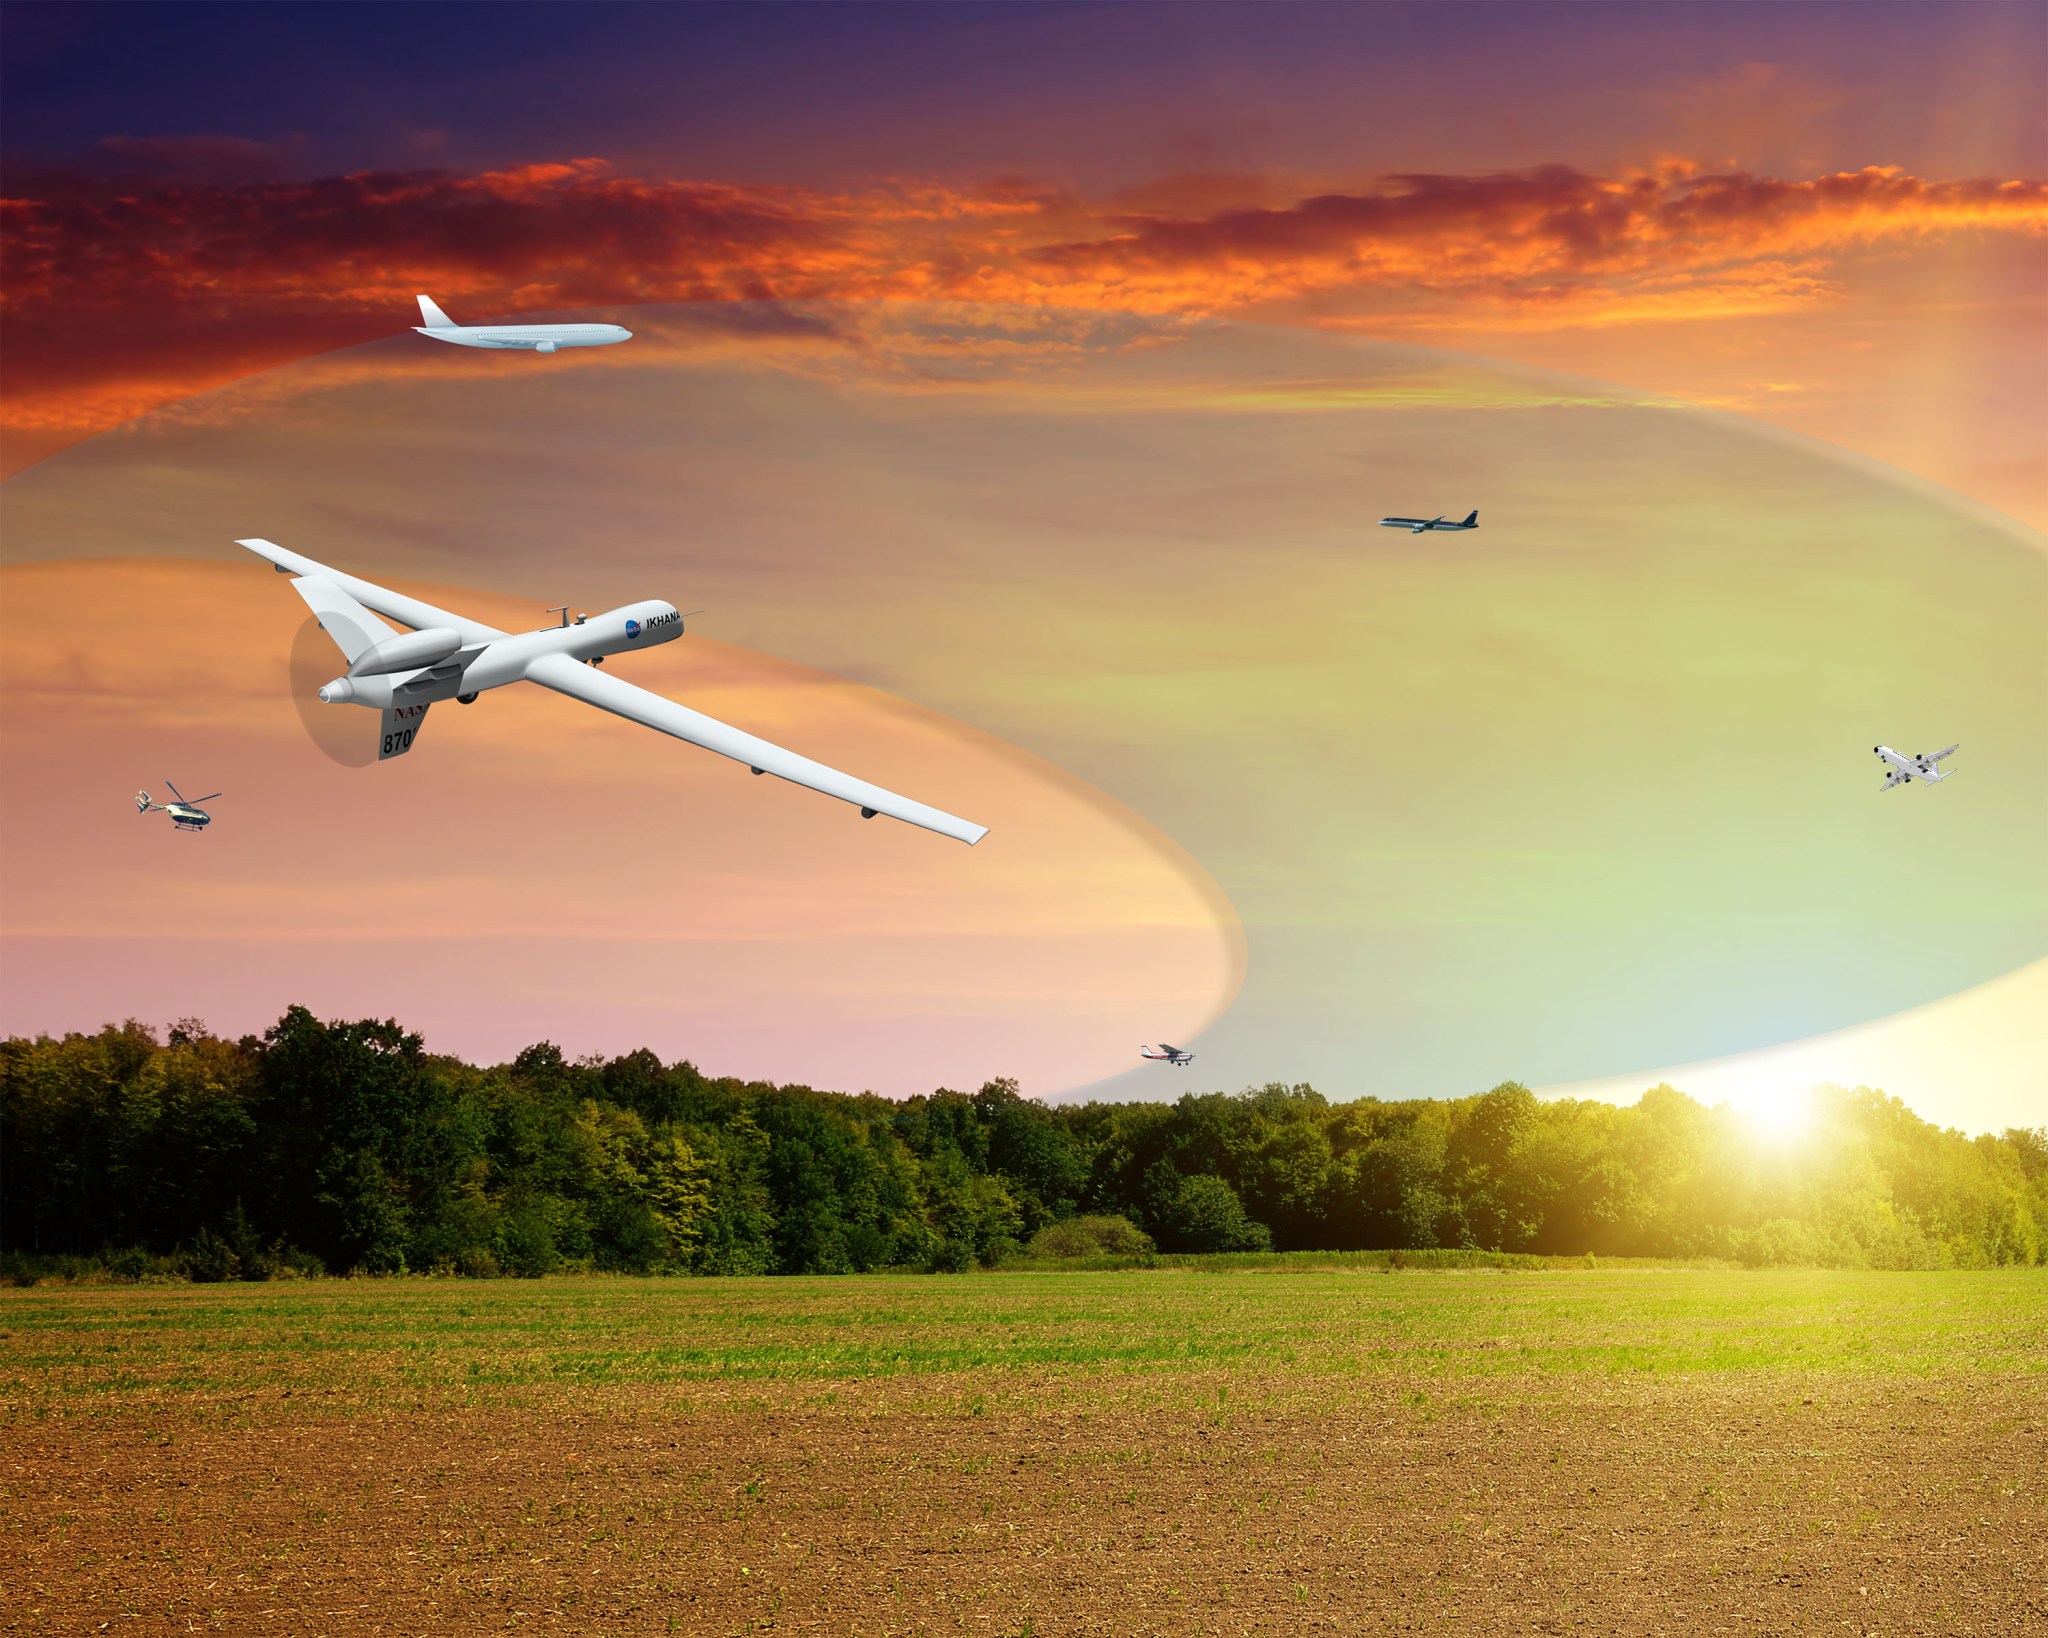 Sense and Avoid Performance graphic, showing various types of aircraft flying over a field during sunrise.